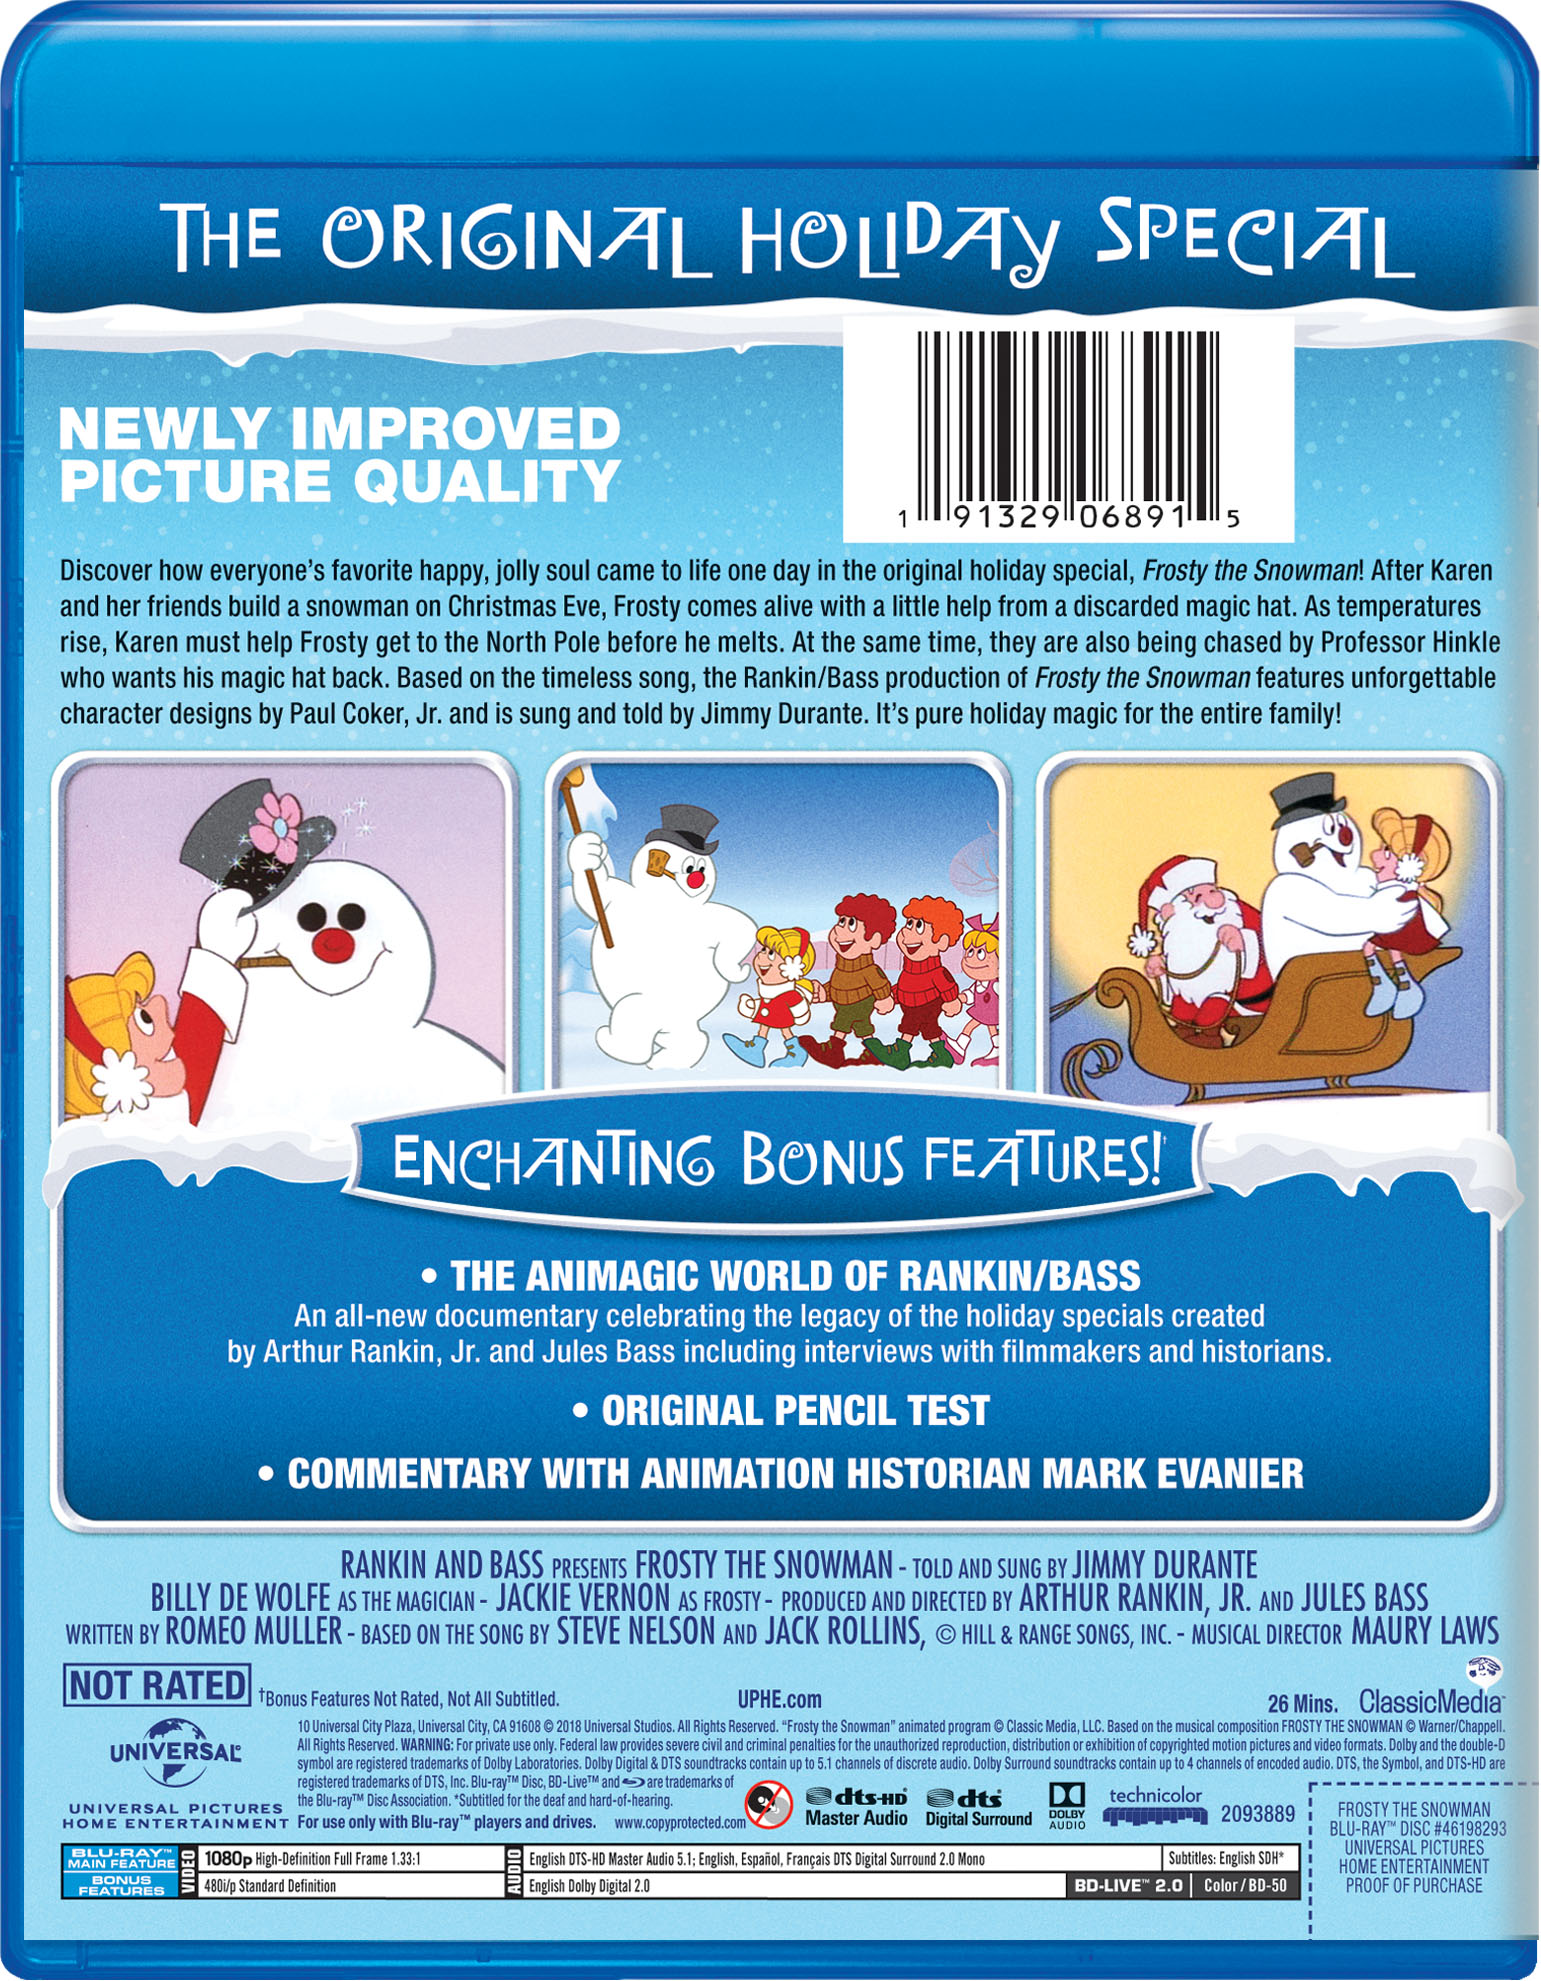 Frosty the Snowman | TV Show Page | DVD, Blu-ray, Digital HD, On Demand